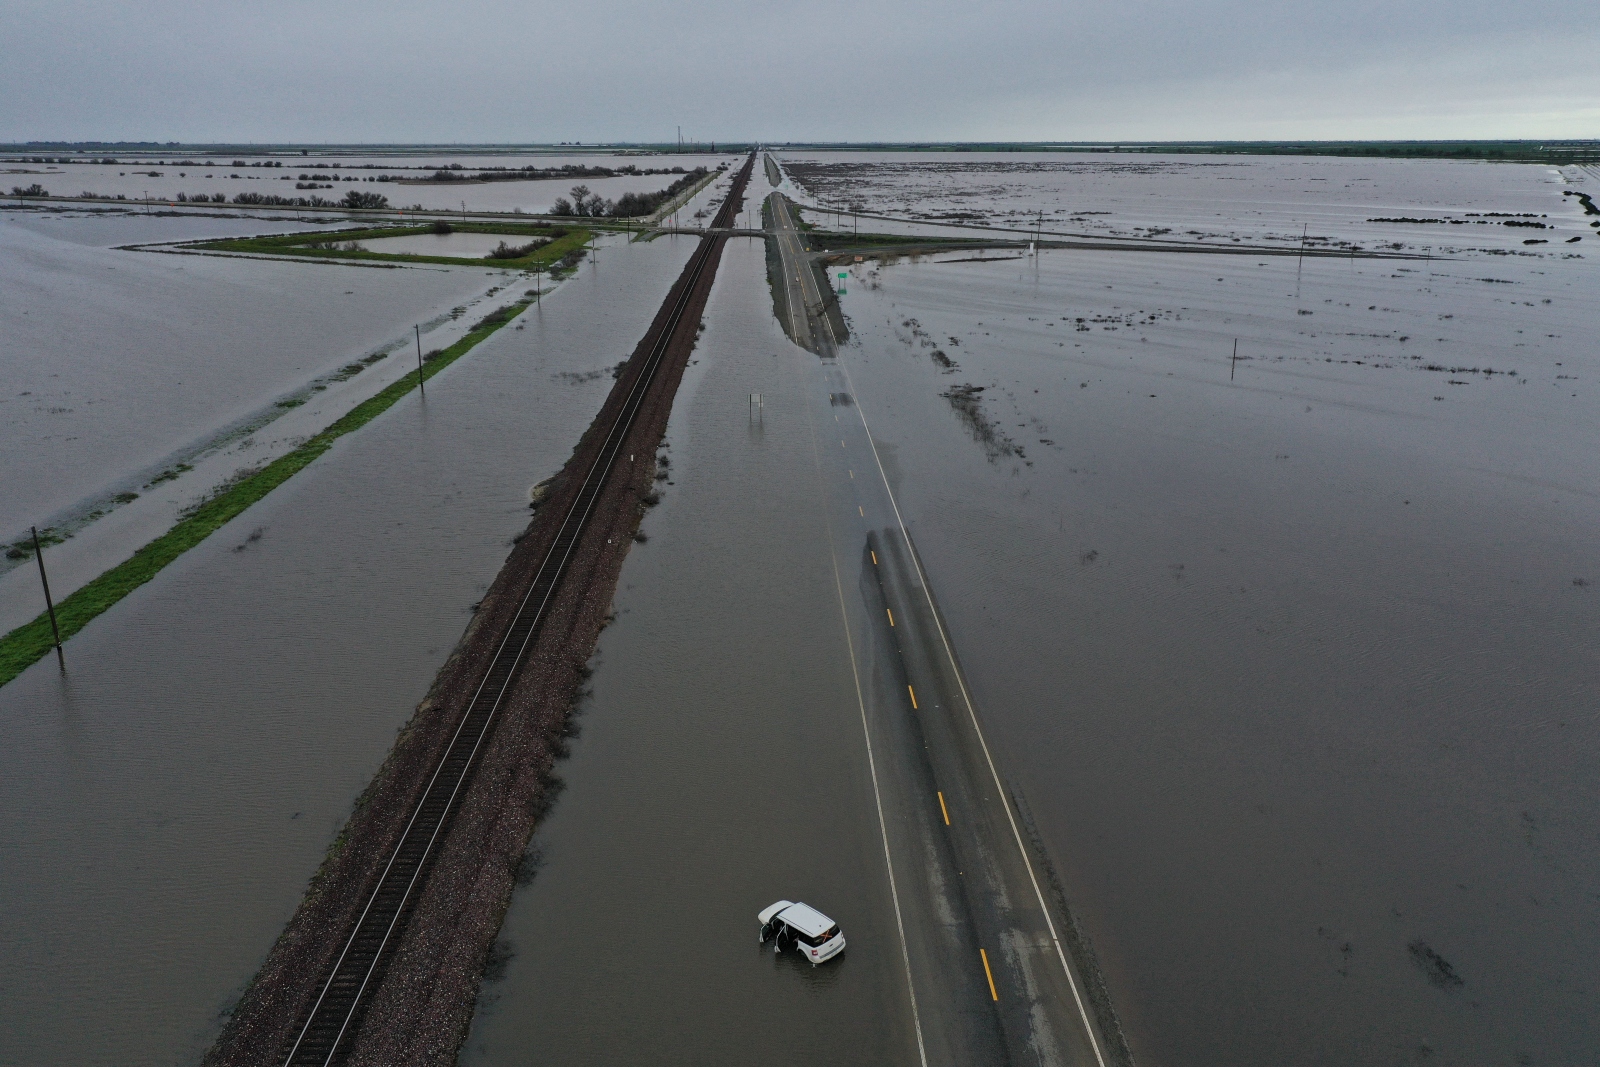 The car is surrounded by flood waters and flooded farmland near Allensworth, California.  Much of the surrounding area was flooded when Lake Tulare reappeared.